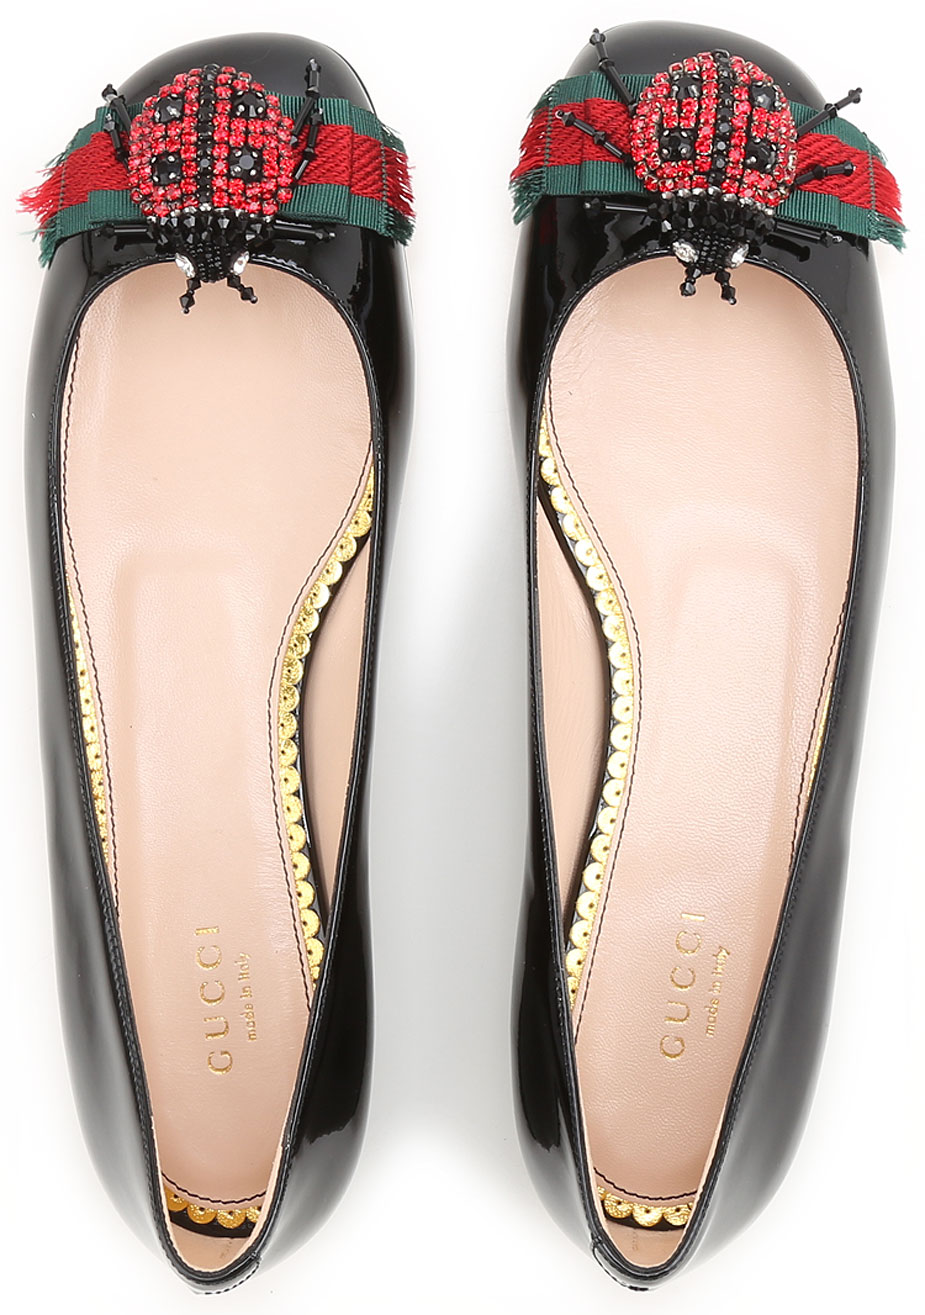 gucci shoes outlet online store